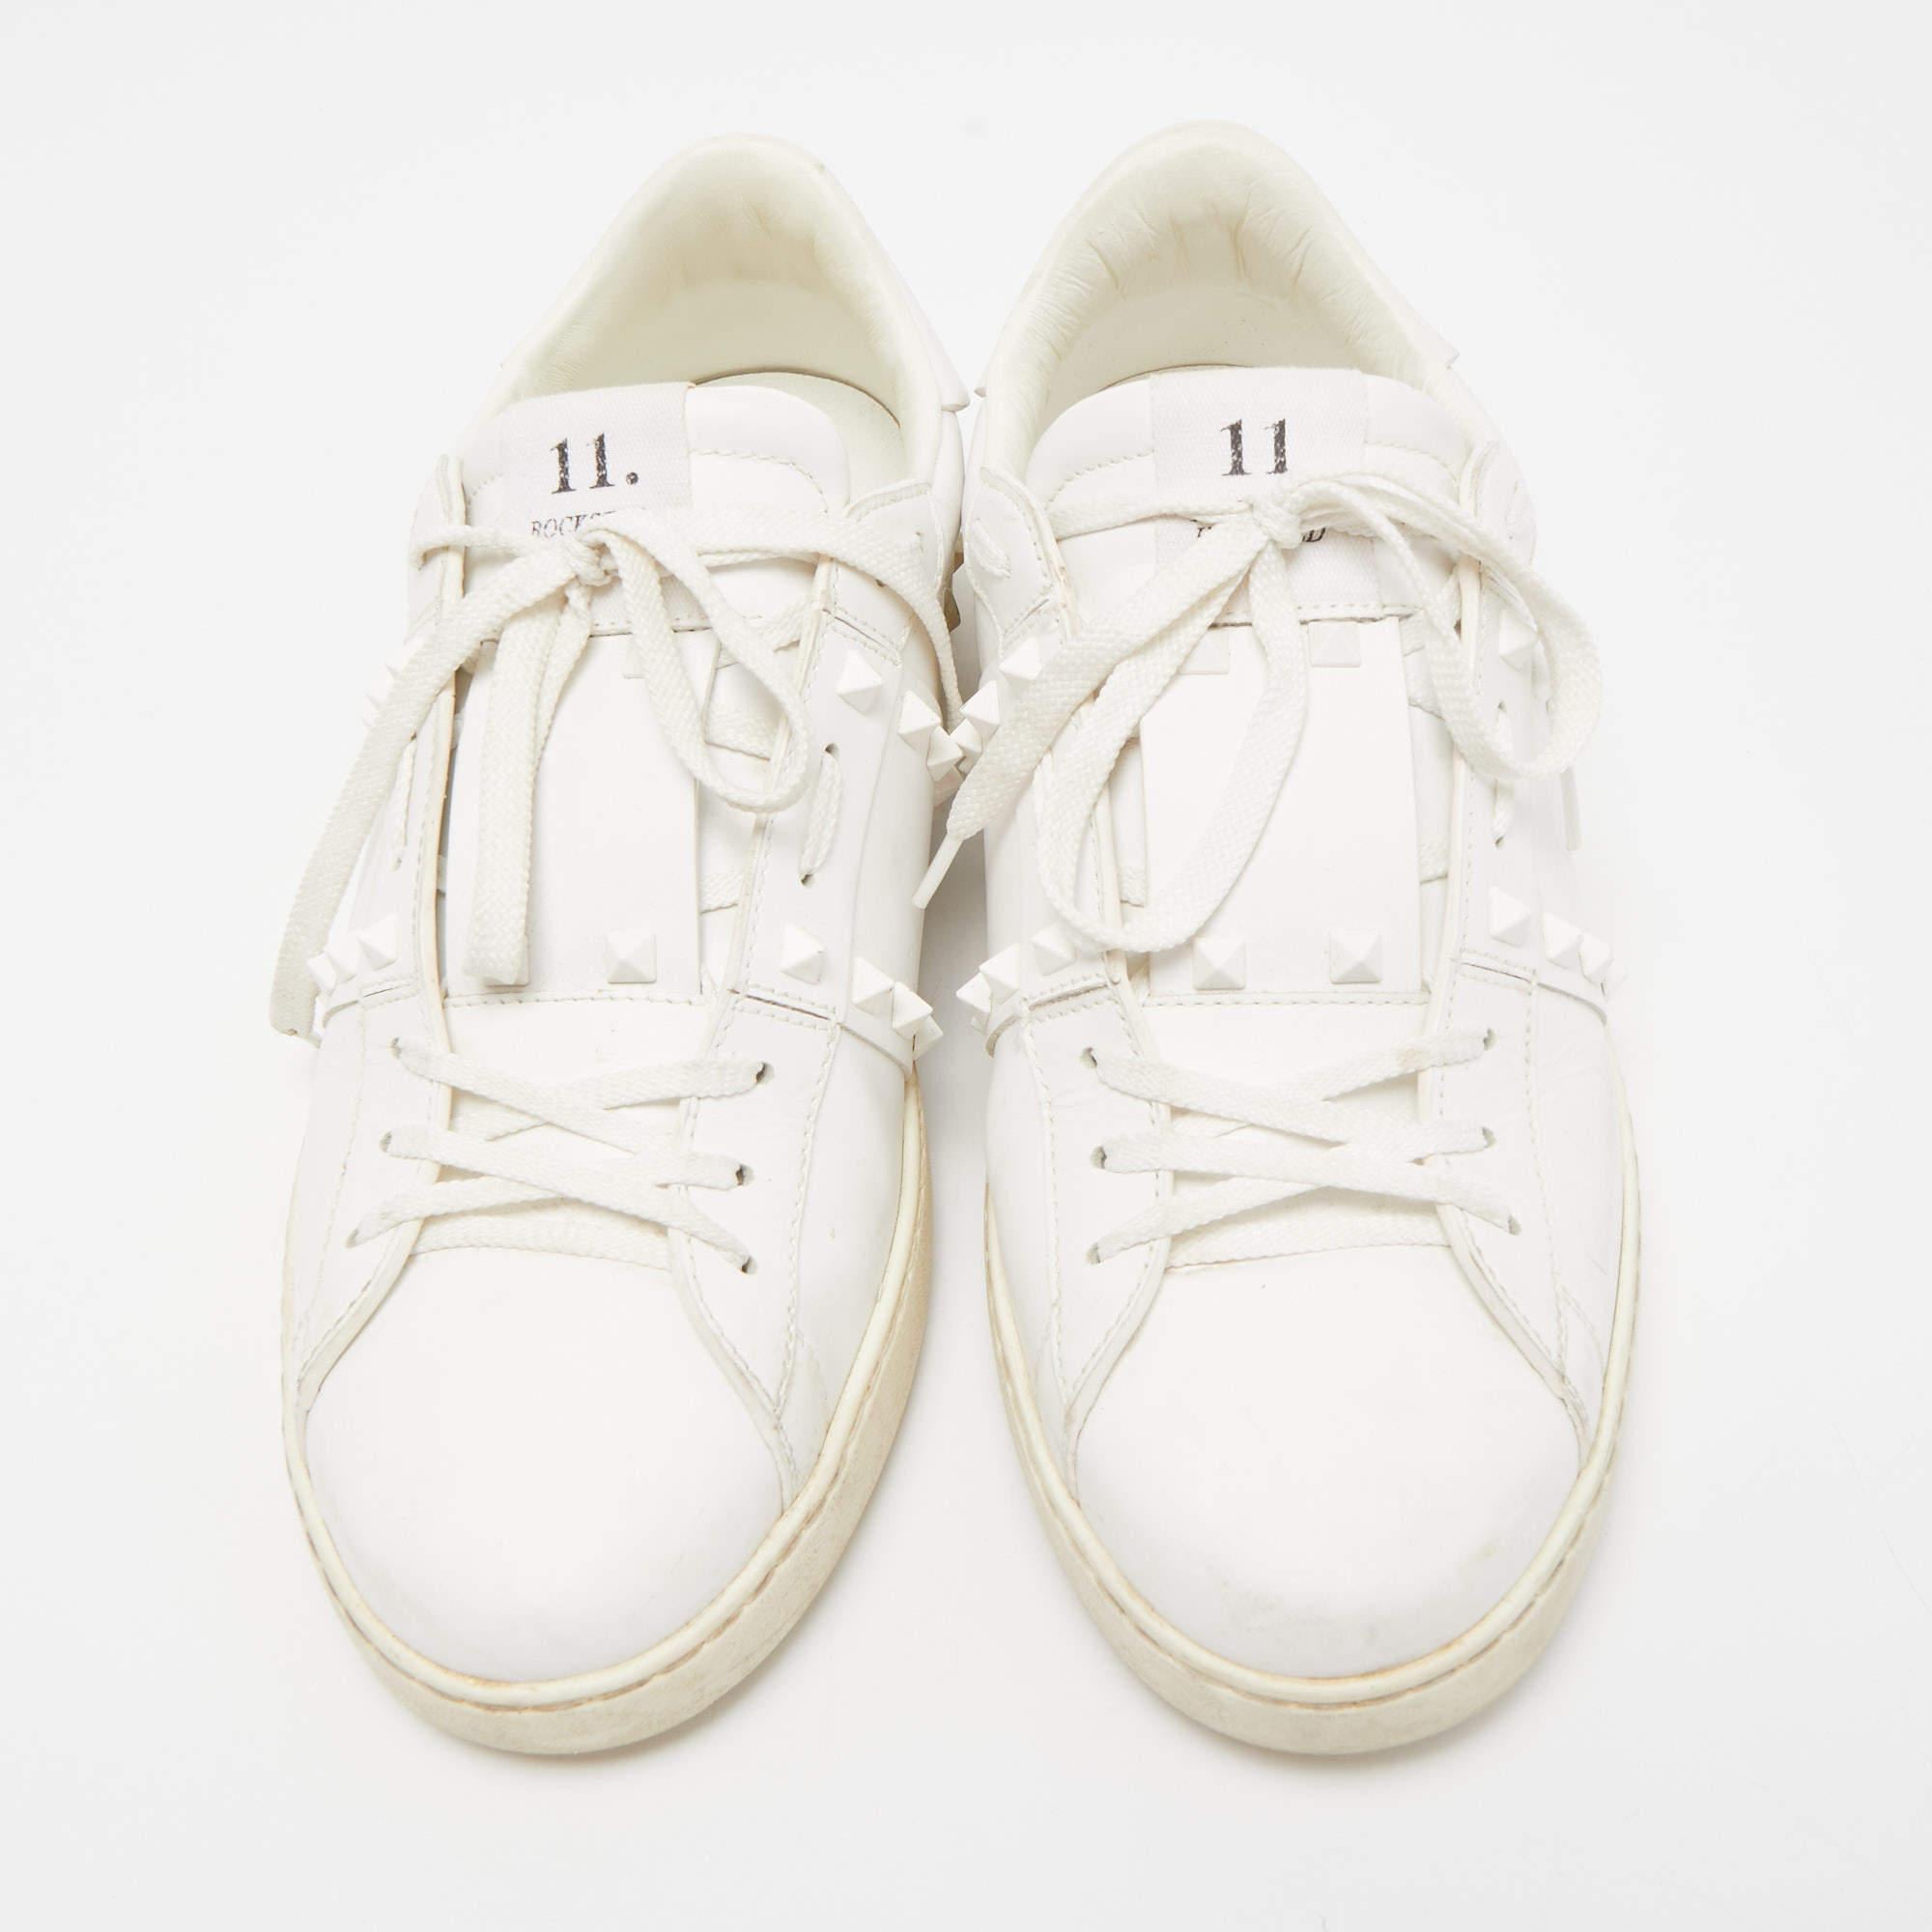 Coming in a classic silhouette, these designer sneakers are a seamless combination of luxury, comfort, and style. These sneakers are finished with signature details and comfortable insoles.

